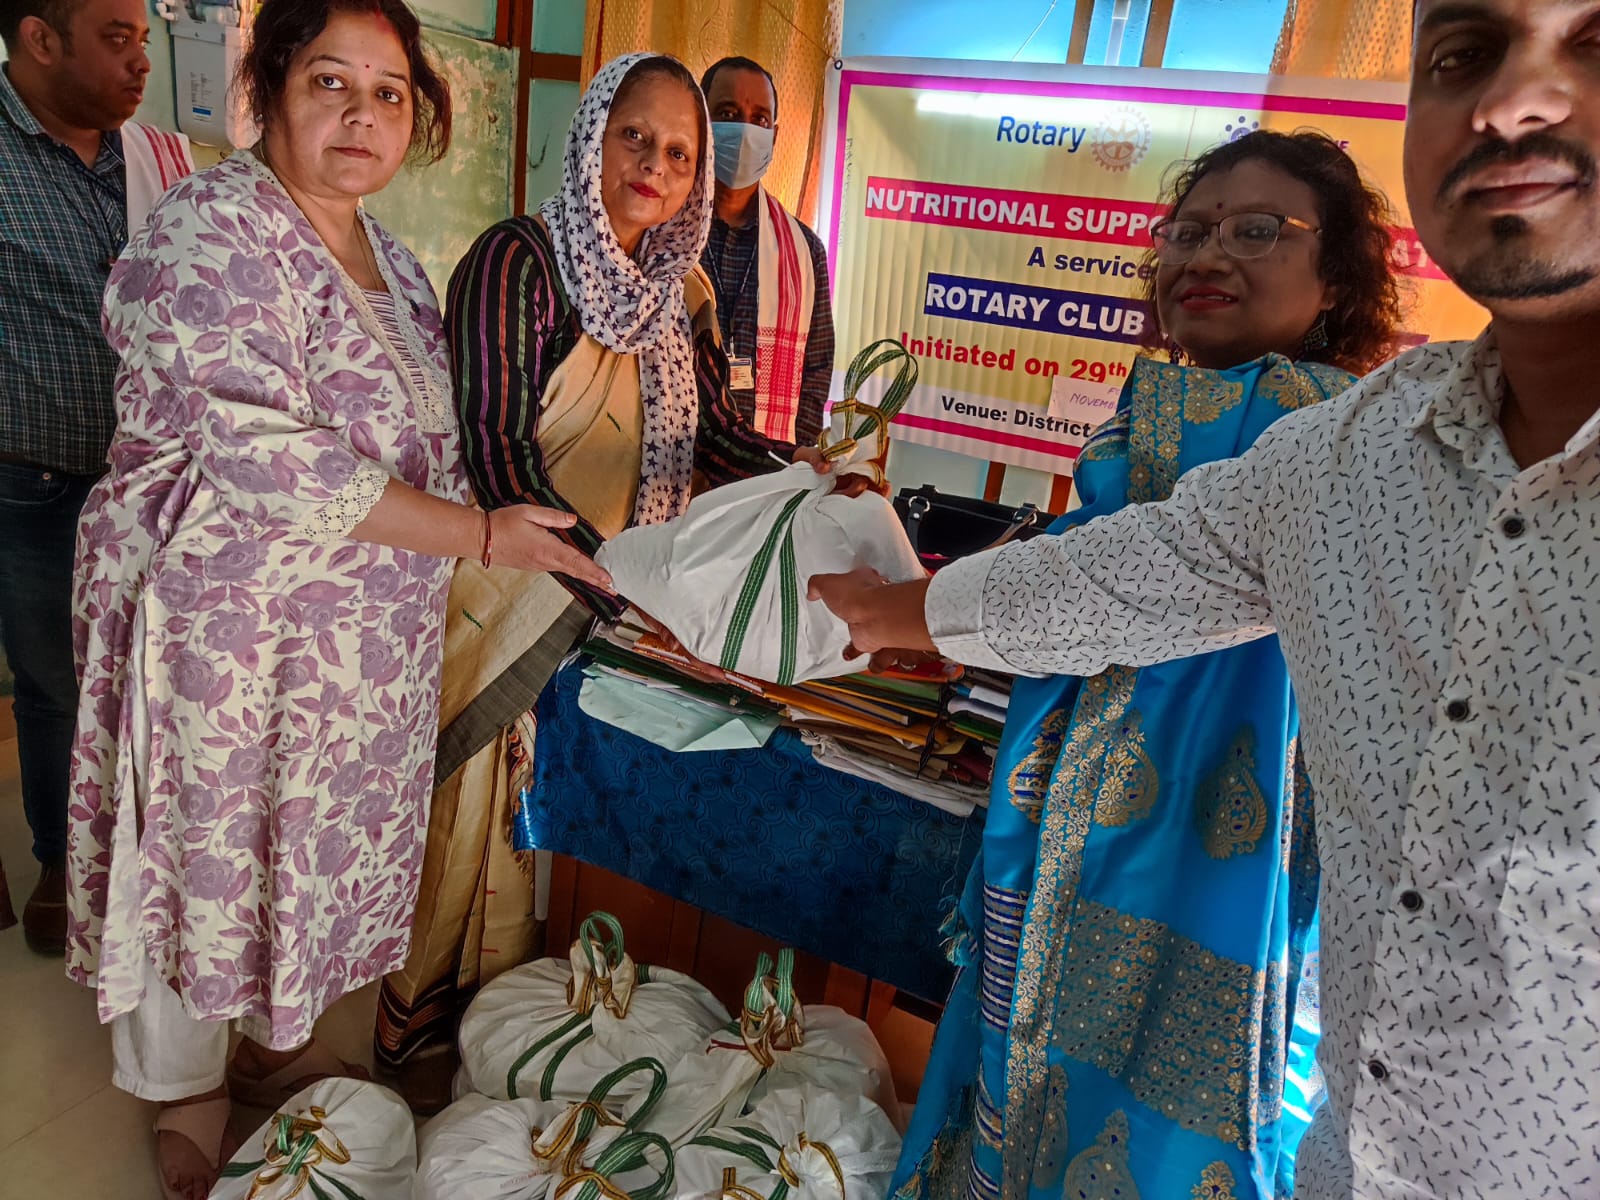 On-going project of providing nutritional support to needy T.B. patients